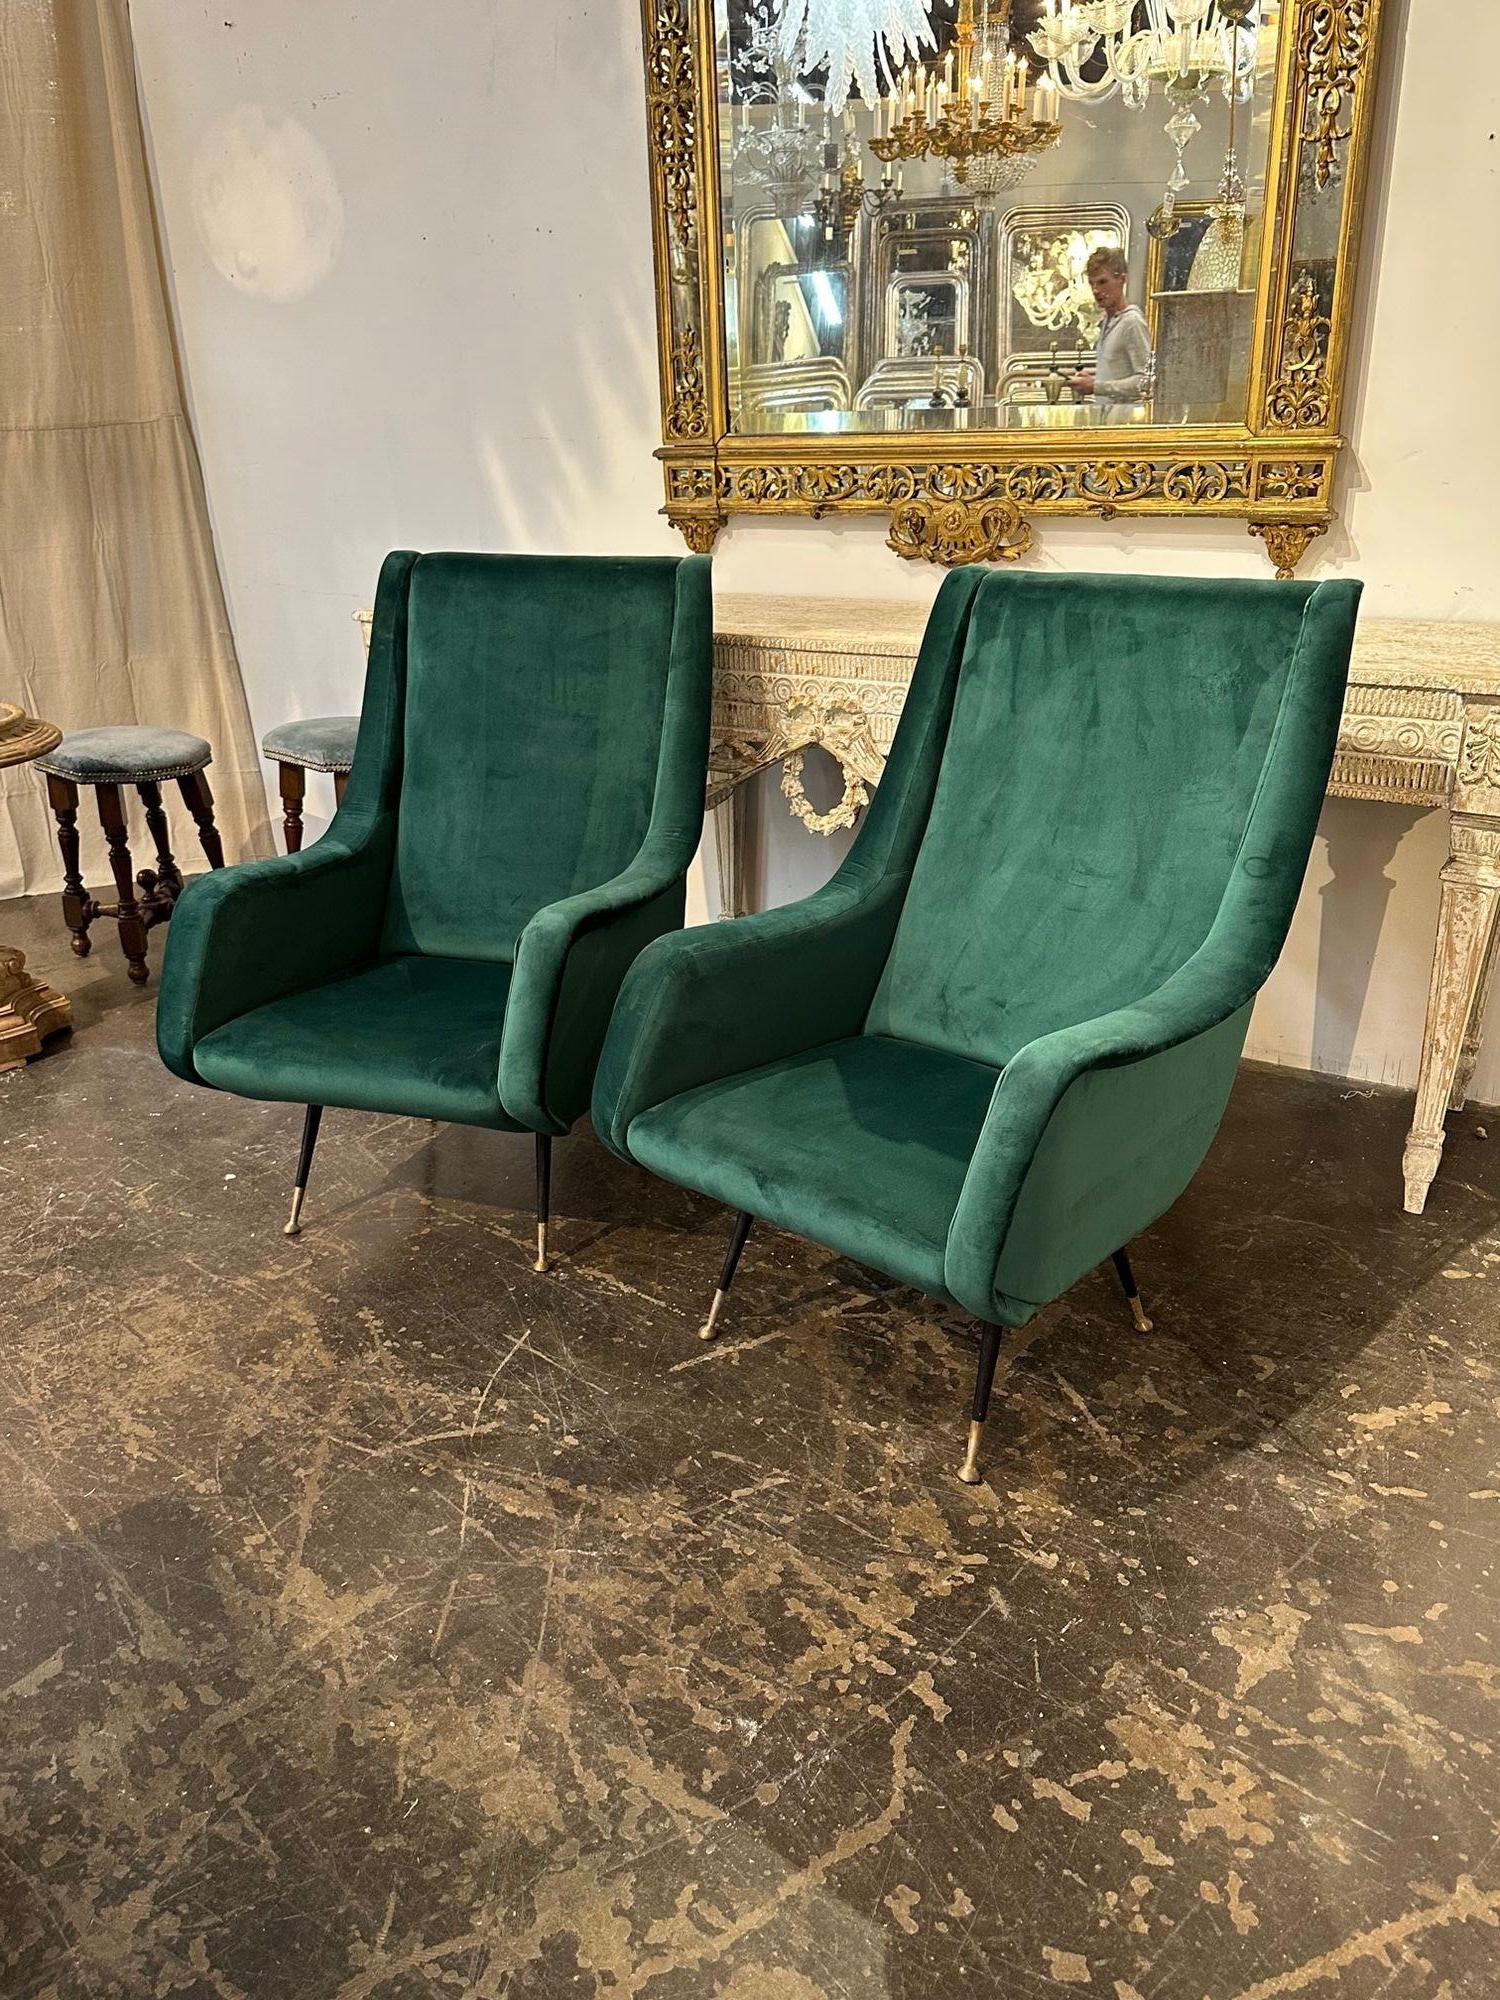 Pair of Italian Green Velvet Mid-Century Modern Chairs In Good Condition For Sale In Dallas, TX